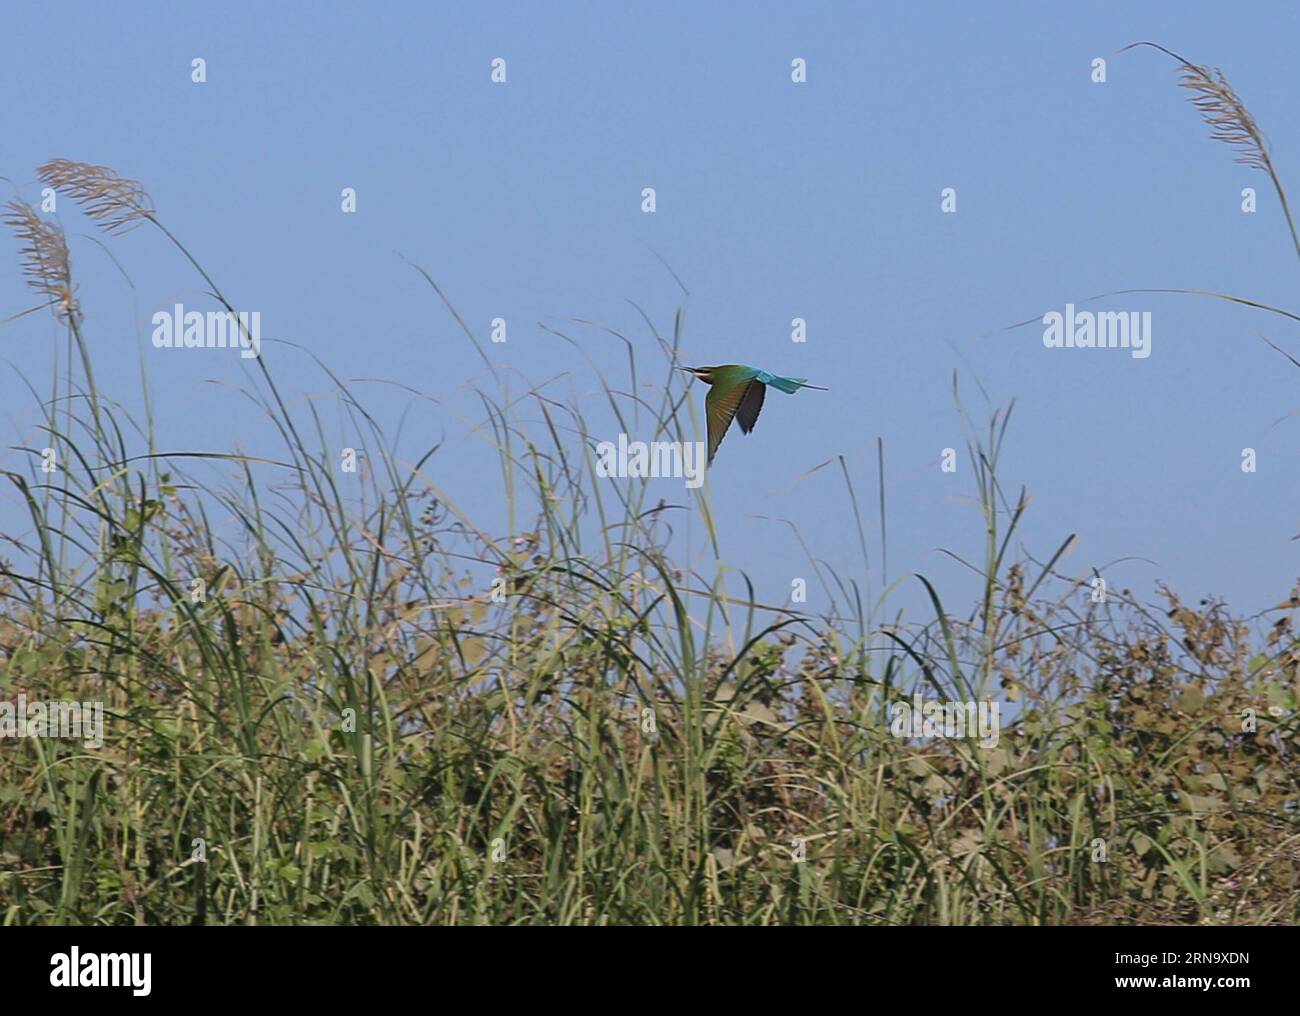 (151223) -- BAGO, Dec. 23, 2015 -- Photo taken on Dec. 23, 2015 shows a blue-tailed bee-eater flying over Moeyungyi Wetland Wildlife Sanctuary in Bago region, Myanmar. Moeyungyi Wetlands is situated in Bago Division. Every year, millions of birds usually fly from the northern hemisphere to the south along the East-Asian Australian Flyway to escape from winter. They stop to rest and feed in Asia. So the flyway contains a network of wetlands and Moeyungyi is one of which could cooperate to certain migrated as well as domestic birds. ) MYANMAR-BAGO-WETLAND-WILDLIFE UxAung PUBLICATIONxNOTxINxCHN Stock Photo